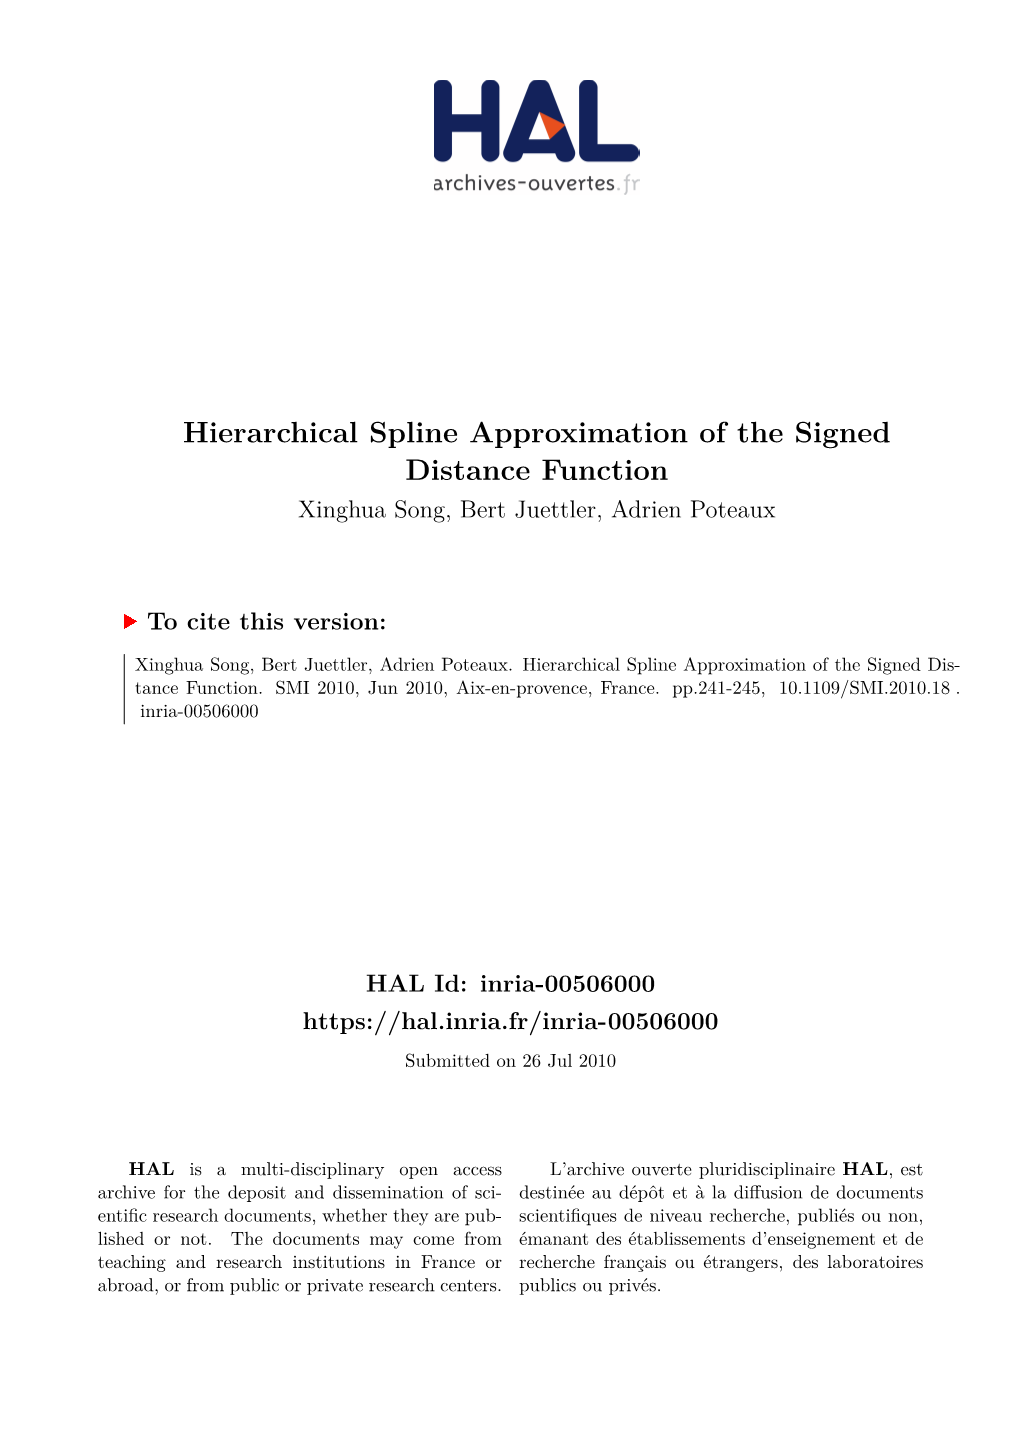 Hierarchical Spline Approximation of the Signed Distance Function Xinghua Song, Bert Juettler, Adrien Poteaux